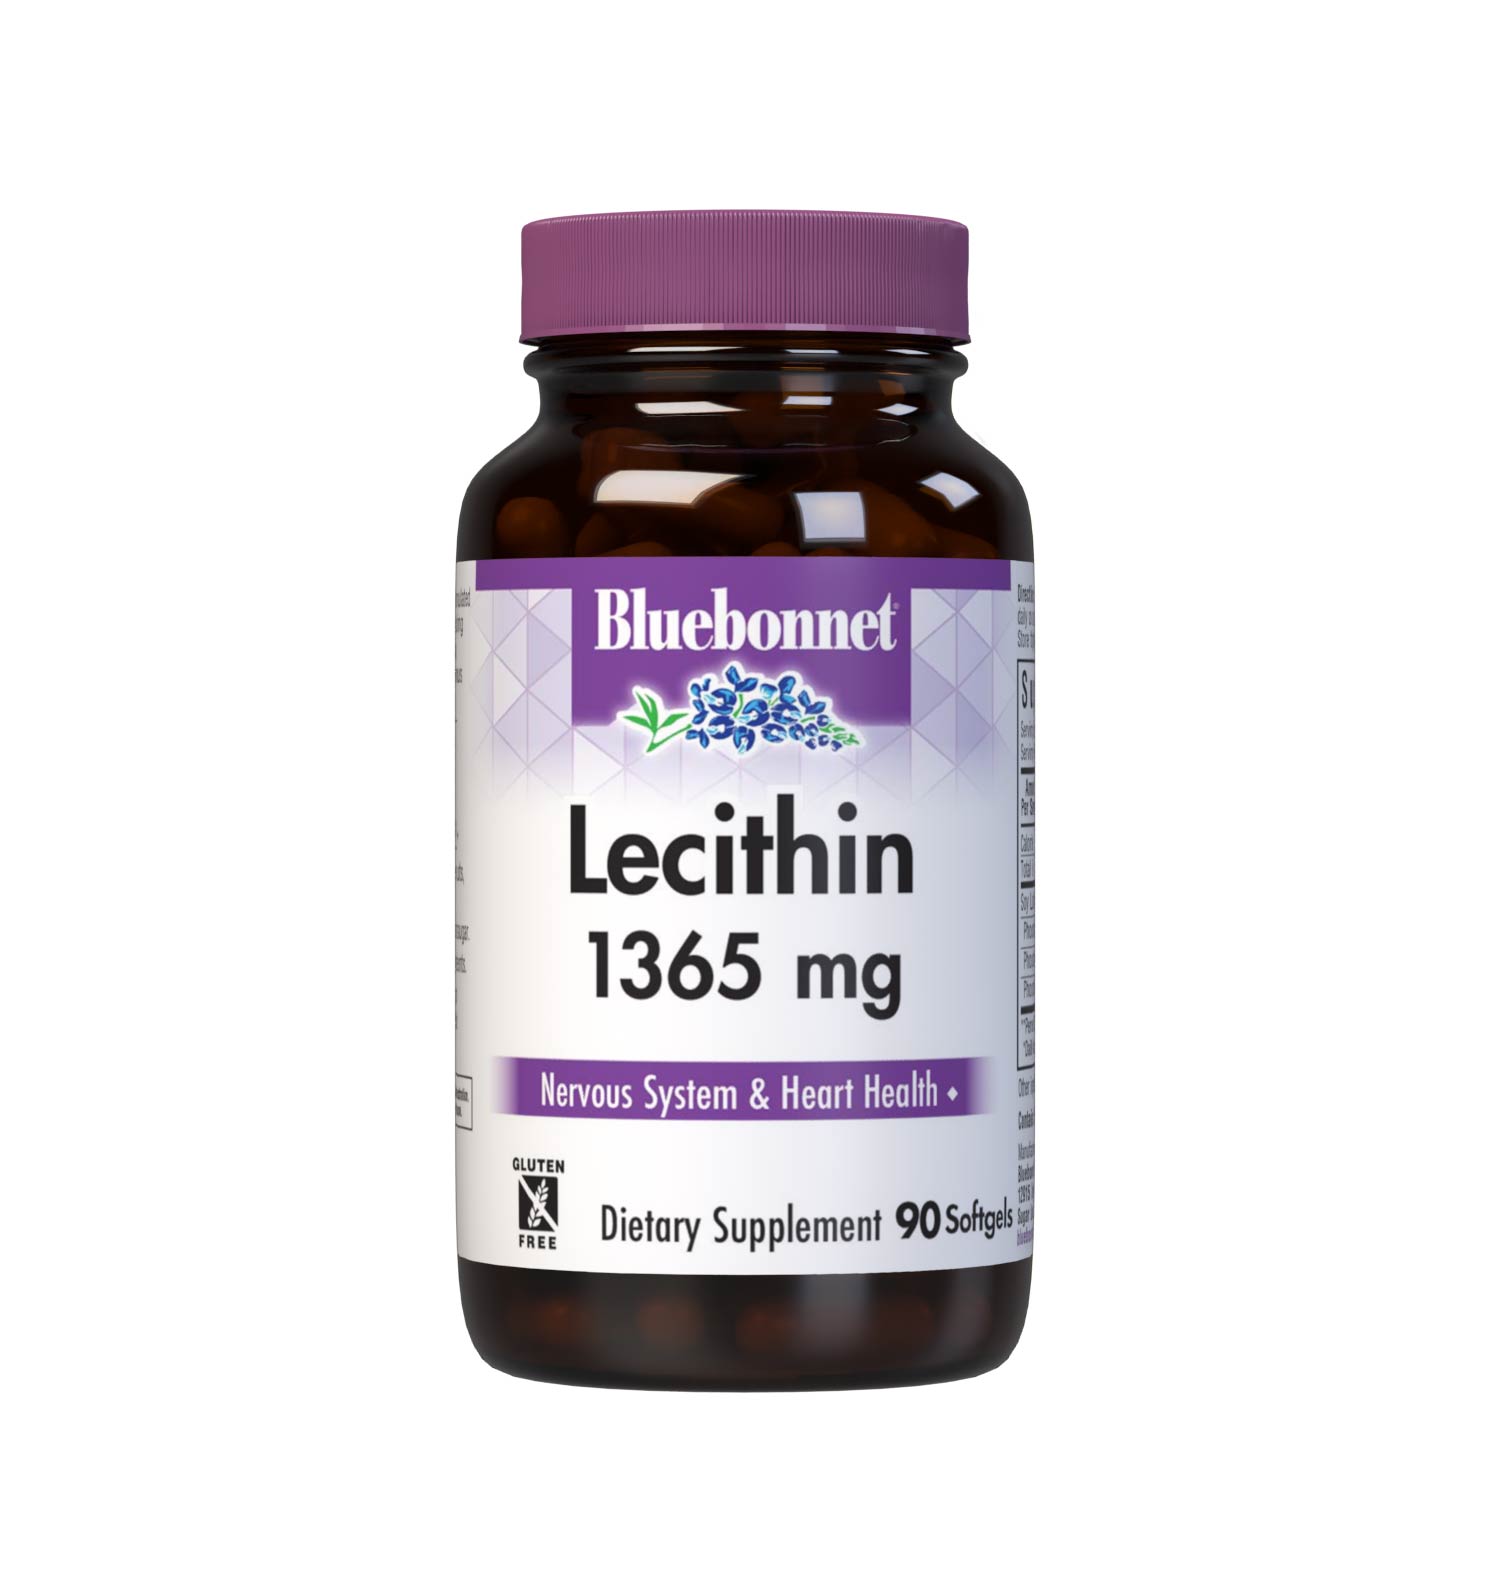 Bluebonnet’s Lecithin 1365 mg 90 Softgels are formulated with soy lecithin, a source of phospholipids including phosphatidylcholine, phosphatidylethanolamine, and phosphatidylinositol to help support the nervous system and cardiovascular health. #size_90 count